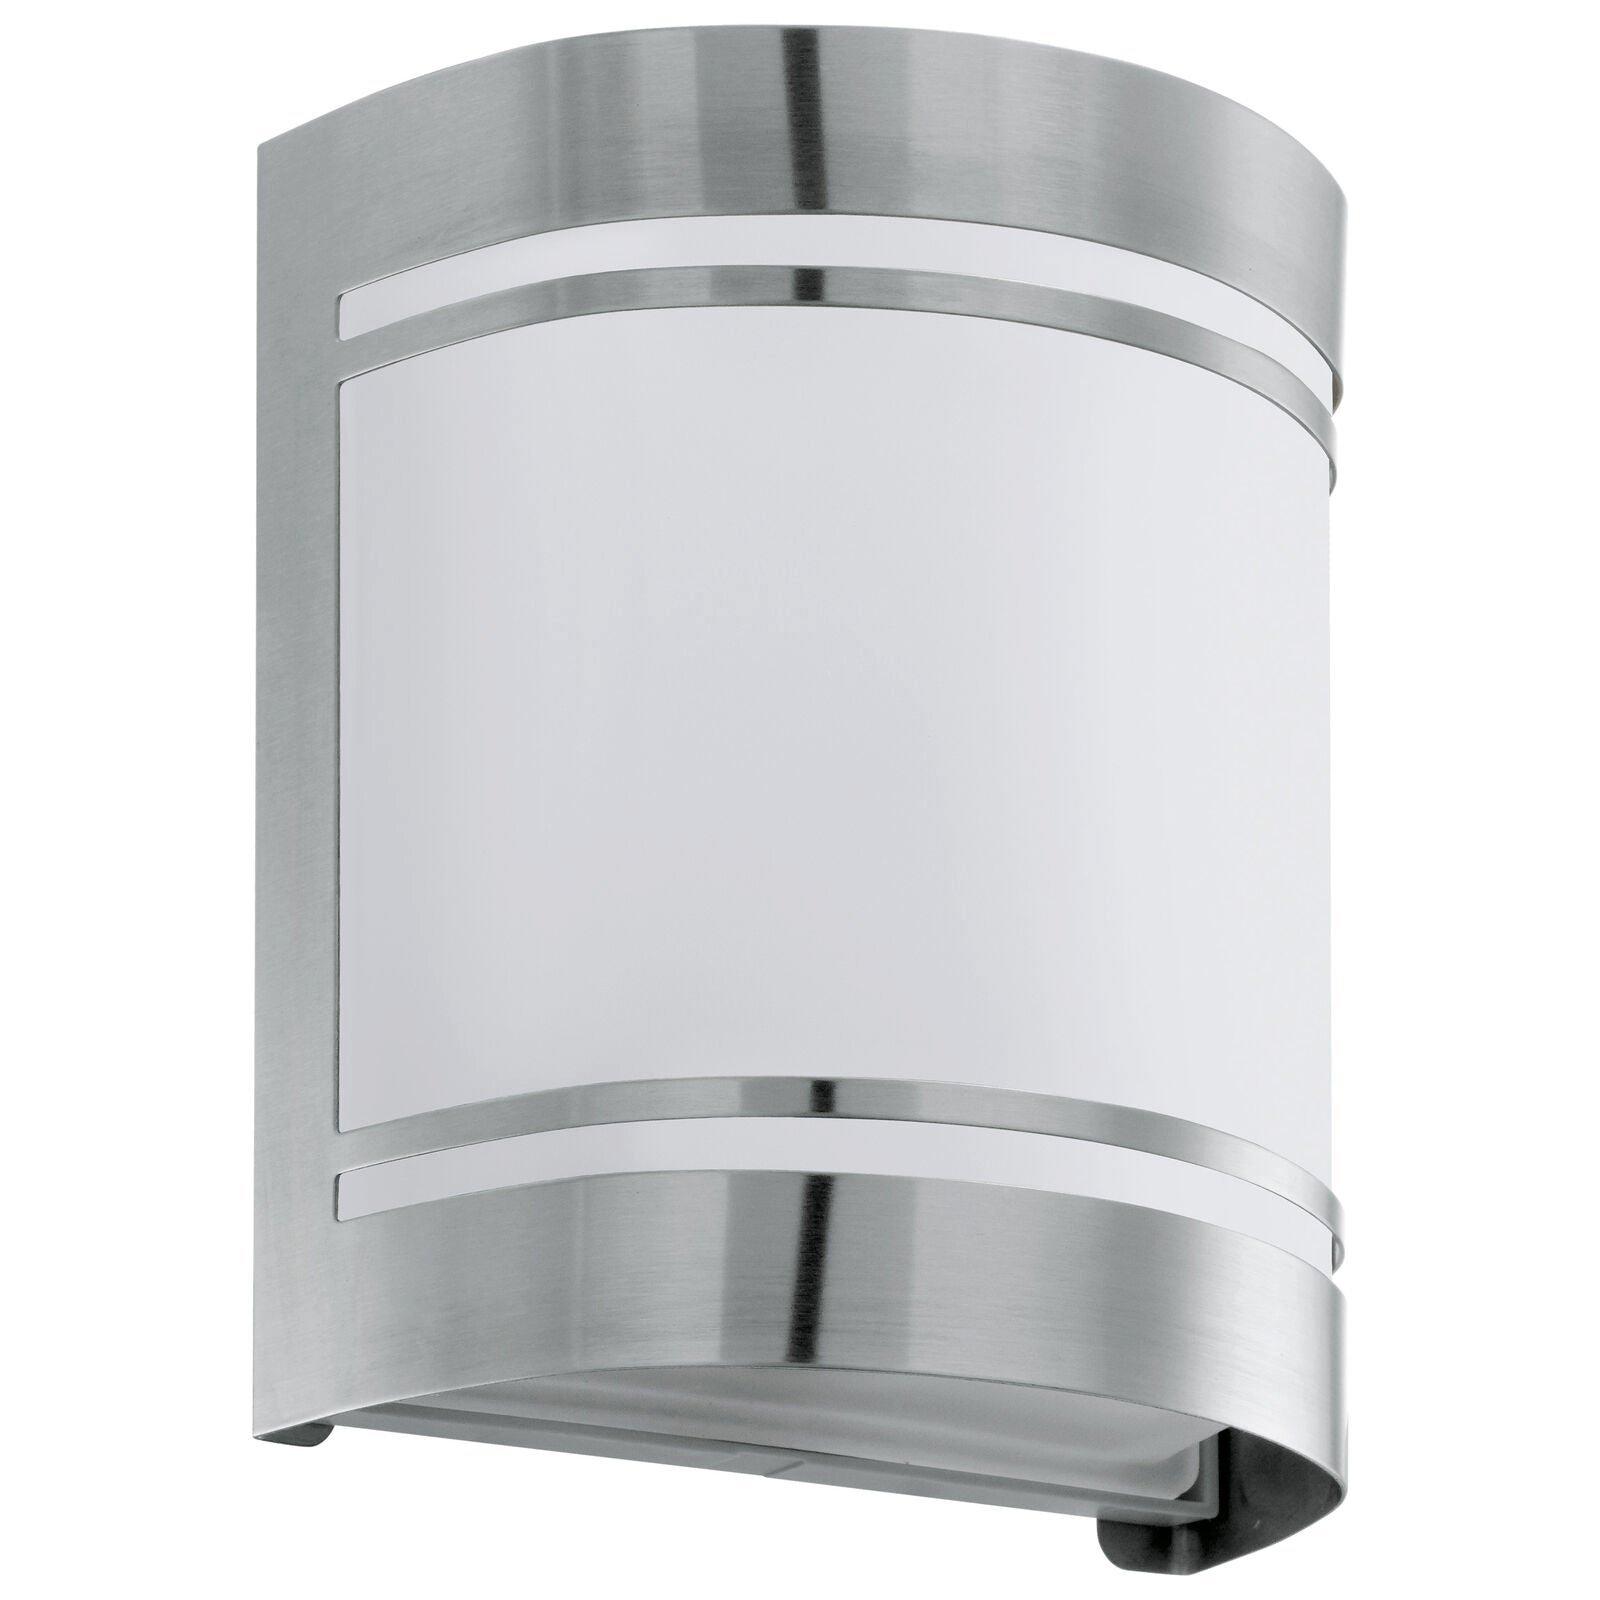 IP44 Outdoor Wall Light Stainless Steel & Diffuser 1 x 40W E27 Bulb Porch Lamp